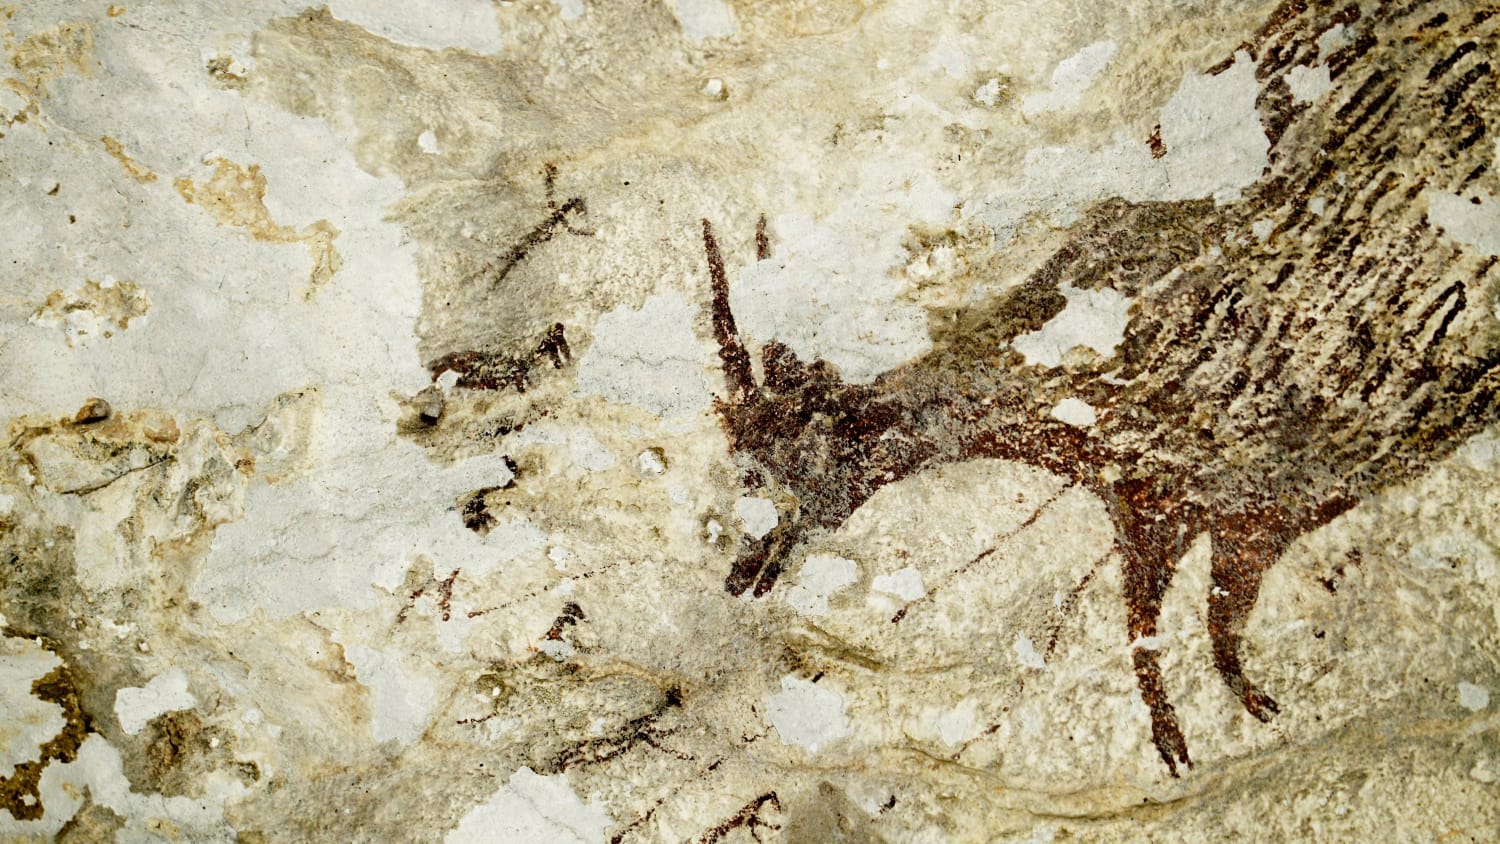 The fight to preserve a 44,000-year-old painting